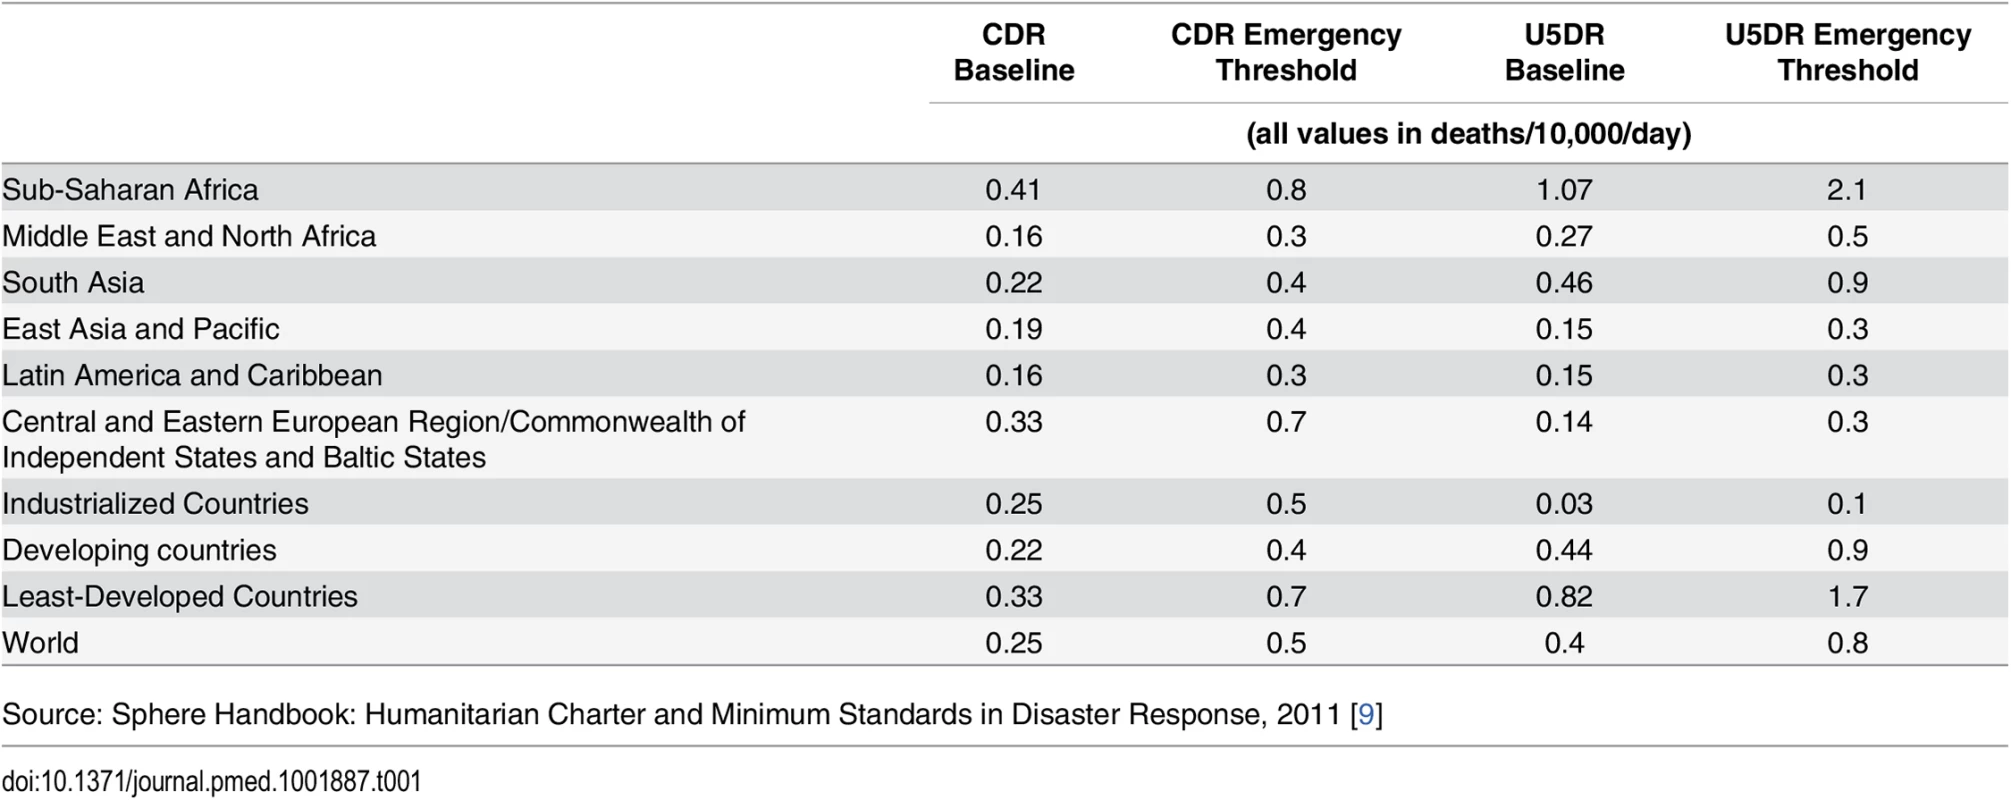 Baseline mortality levels and emergency thresholds by region.